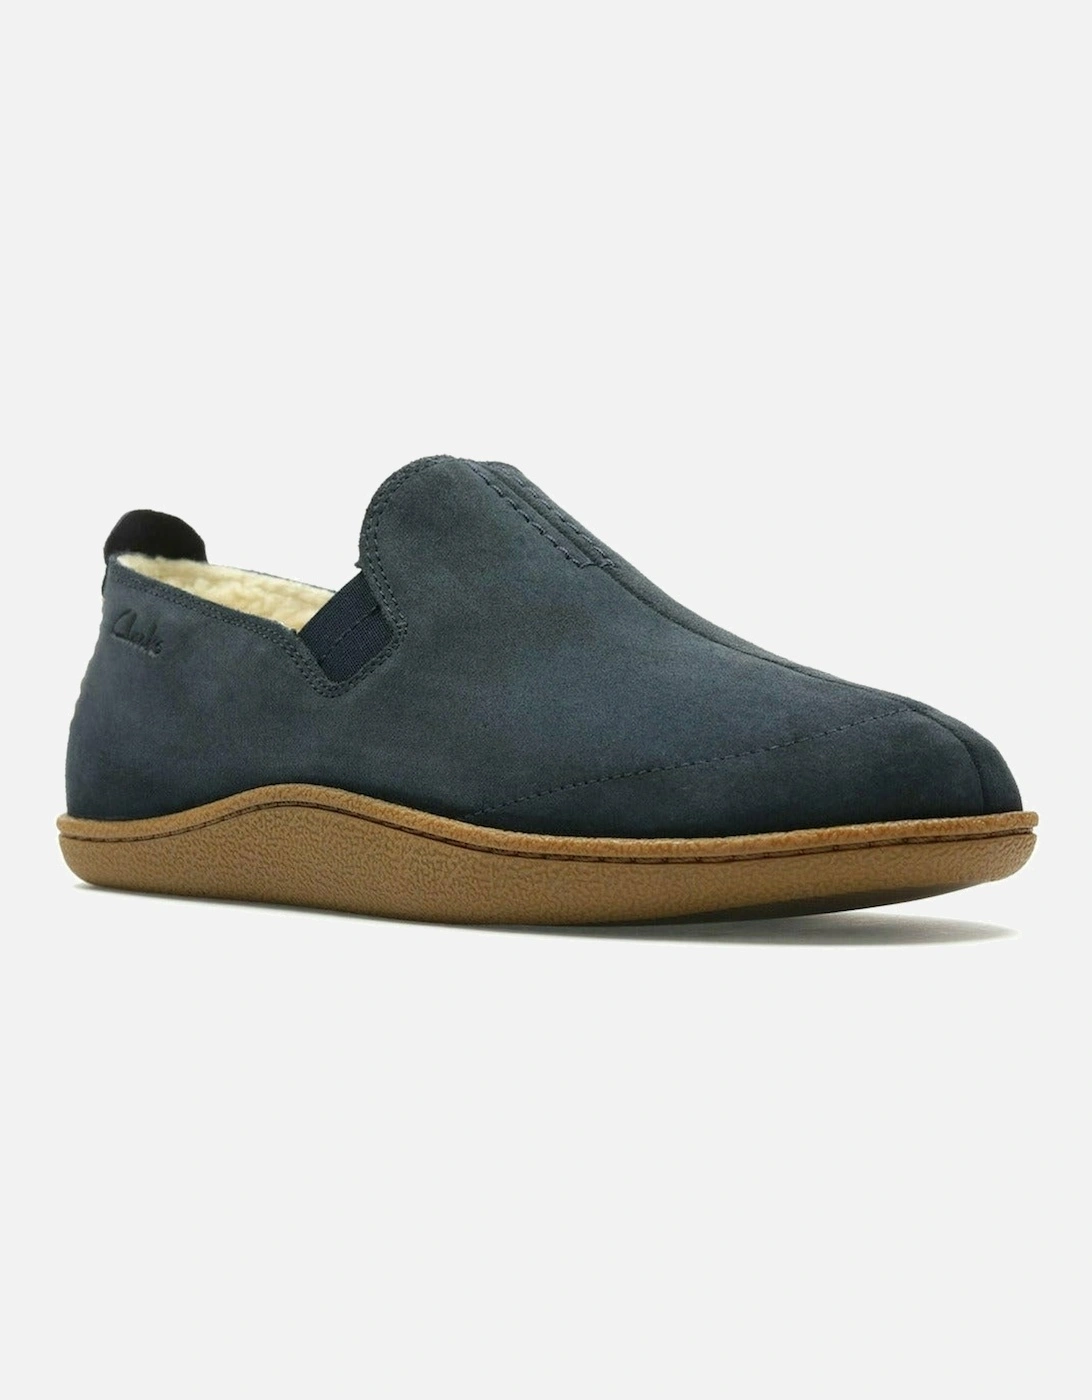 Home Mocc in Navy Suede, 8 of 7